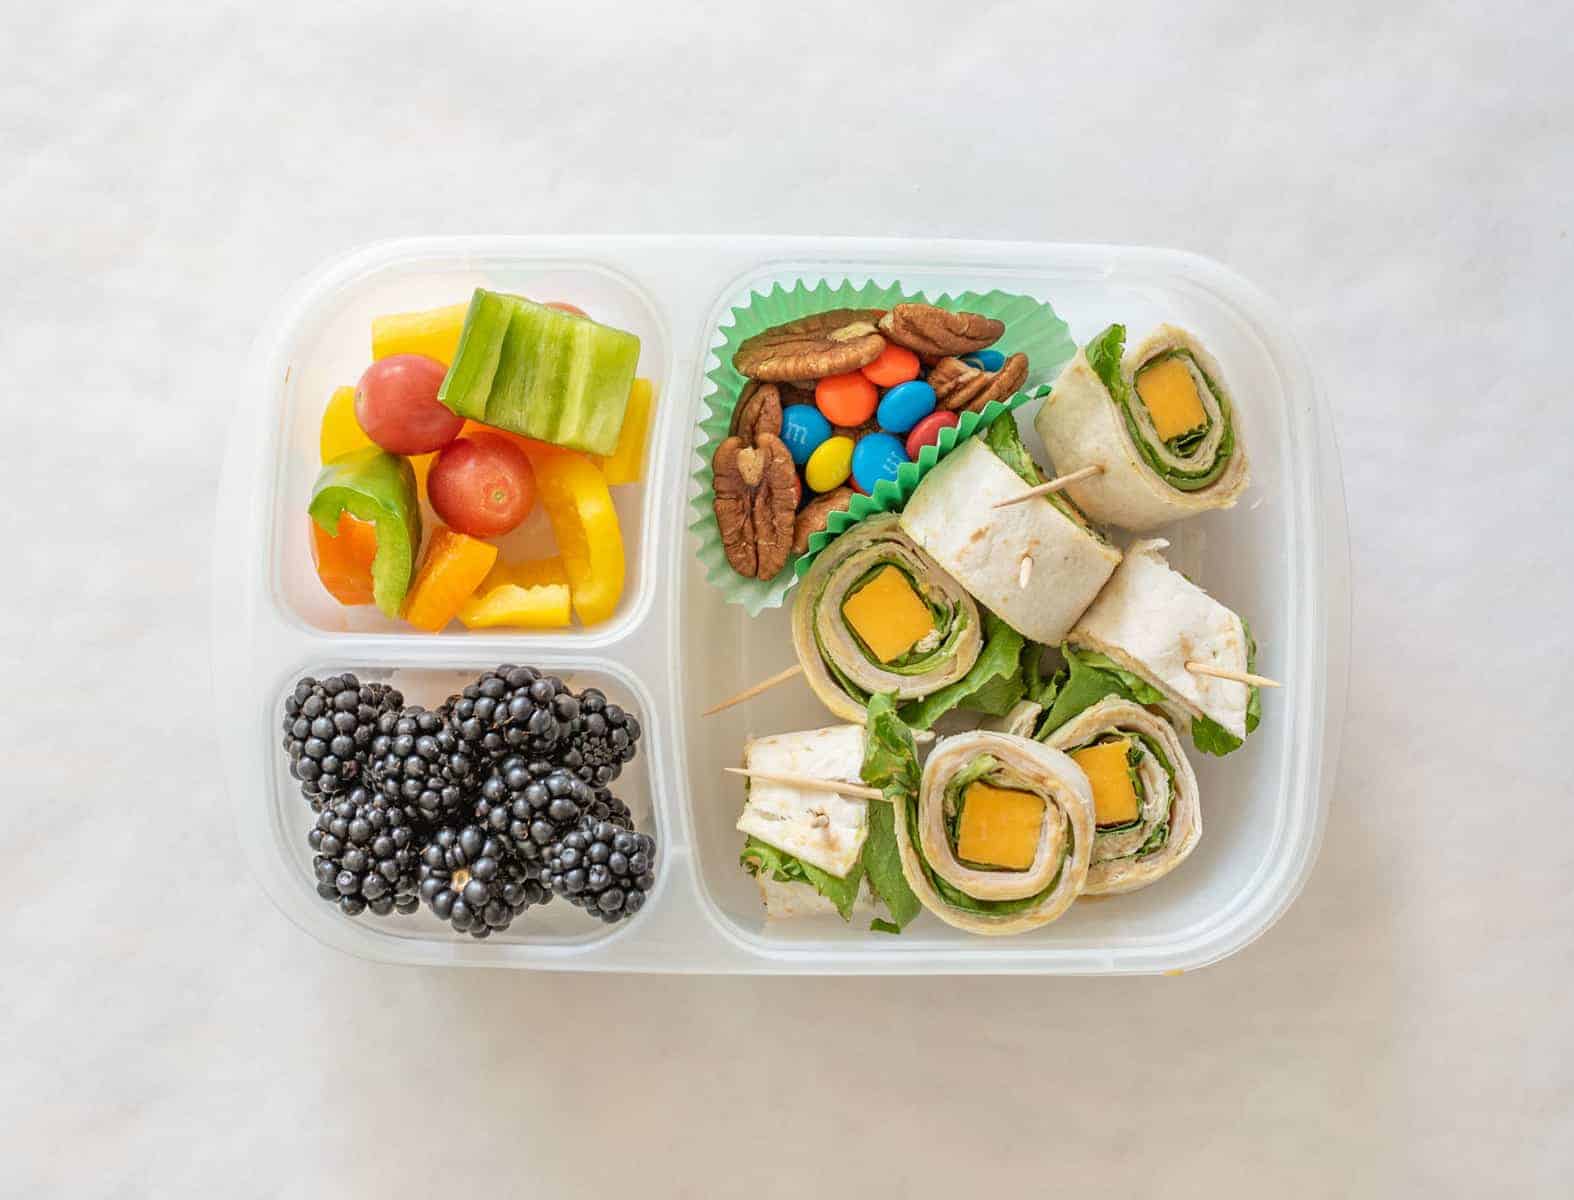 Six Quick & Easy Lunch Boxes | Healthy Back-to-School Lunches